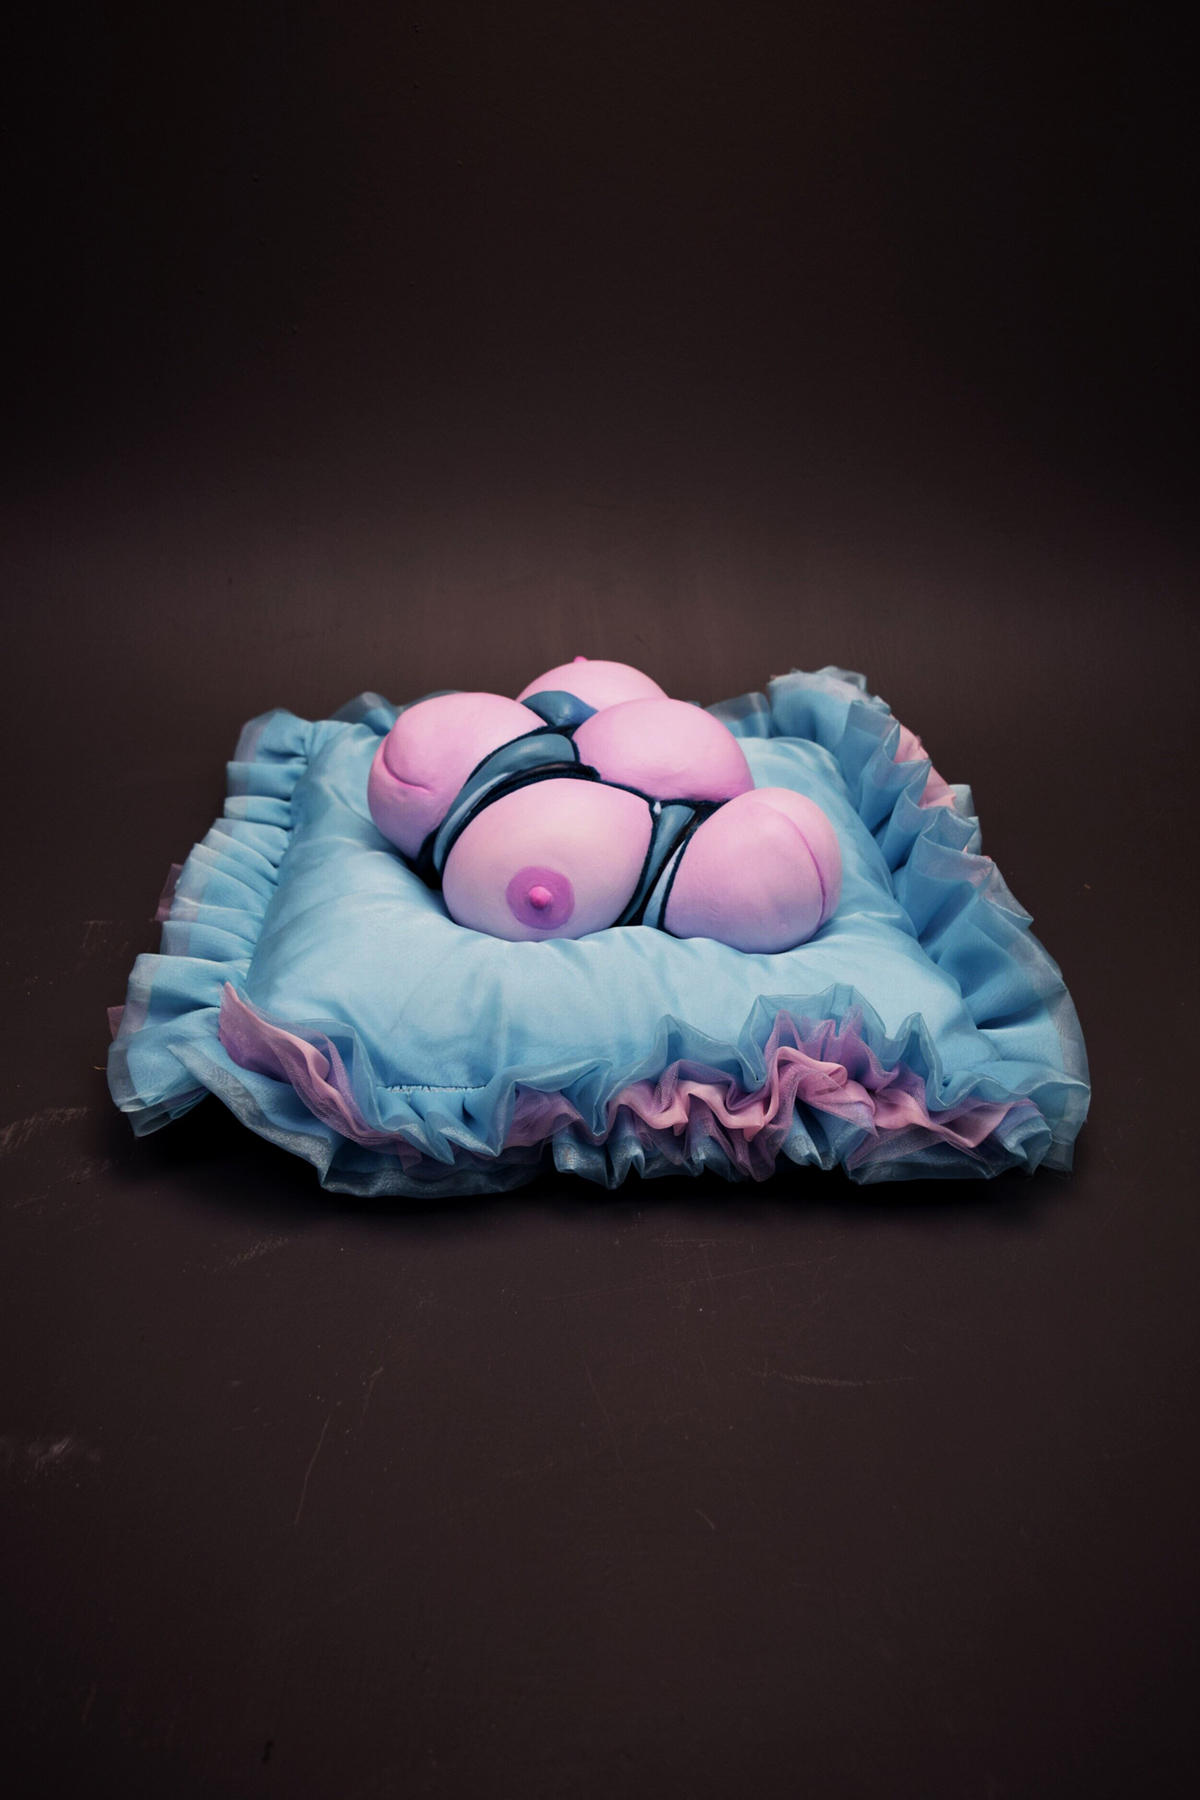 Abstract ceramic sculpture of breasts, courtesy of the artist